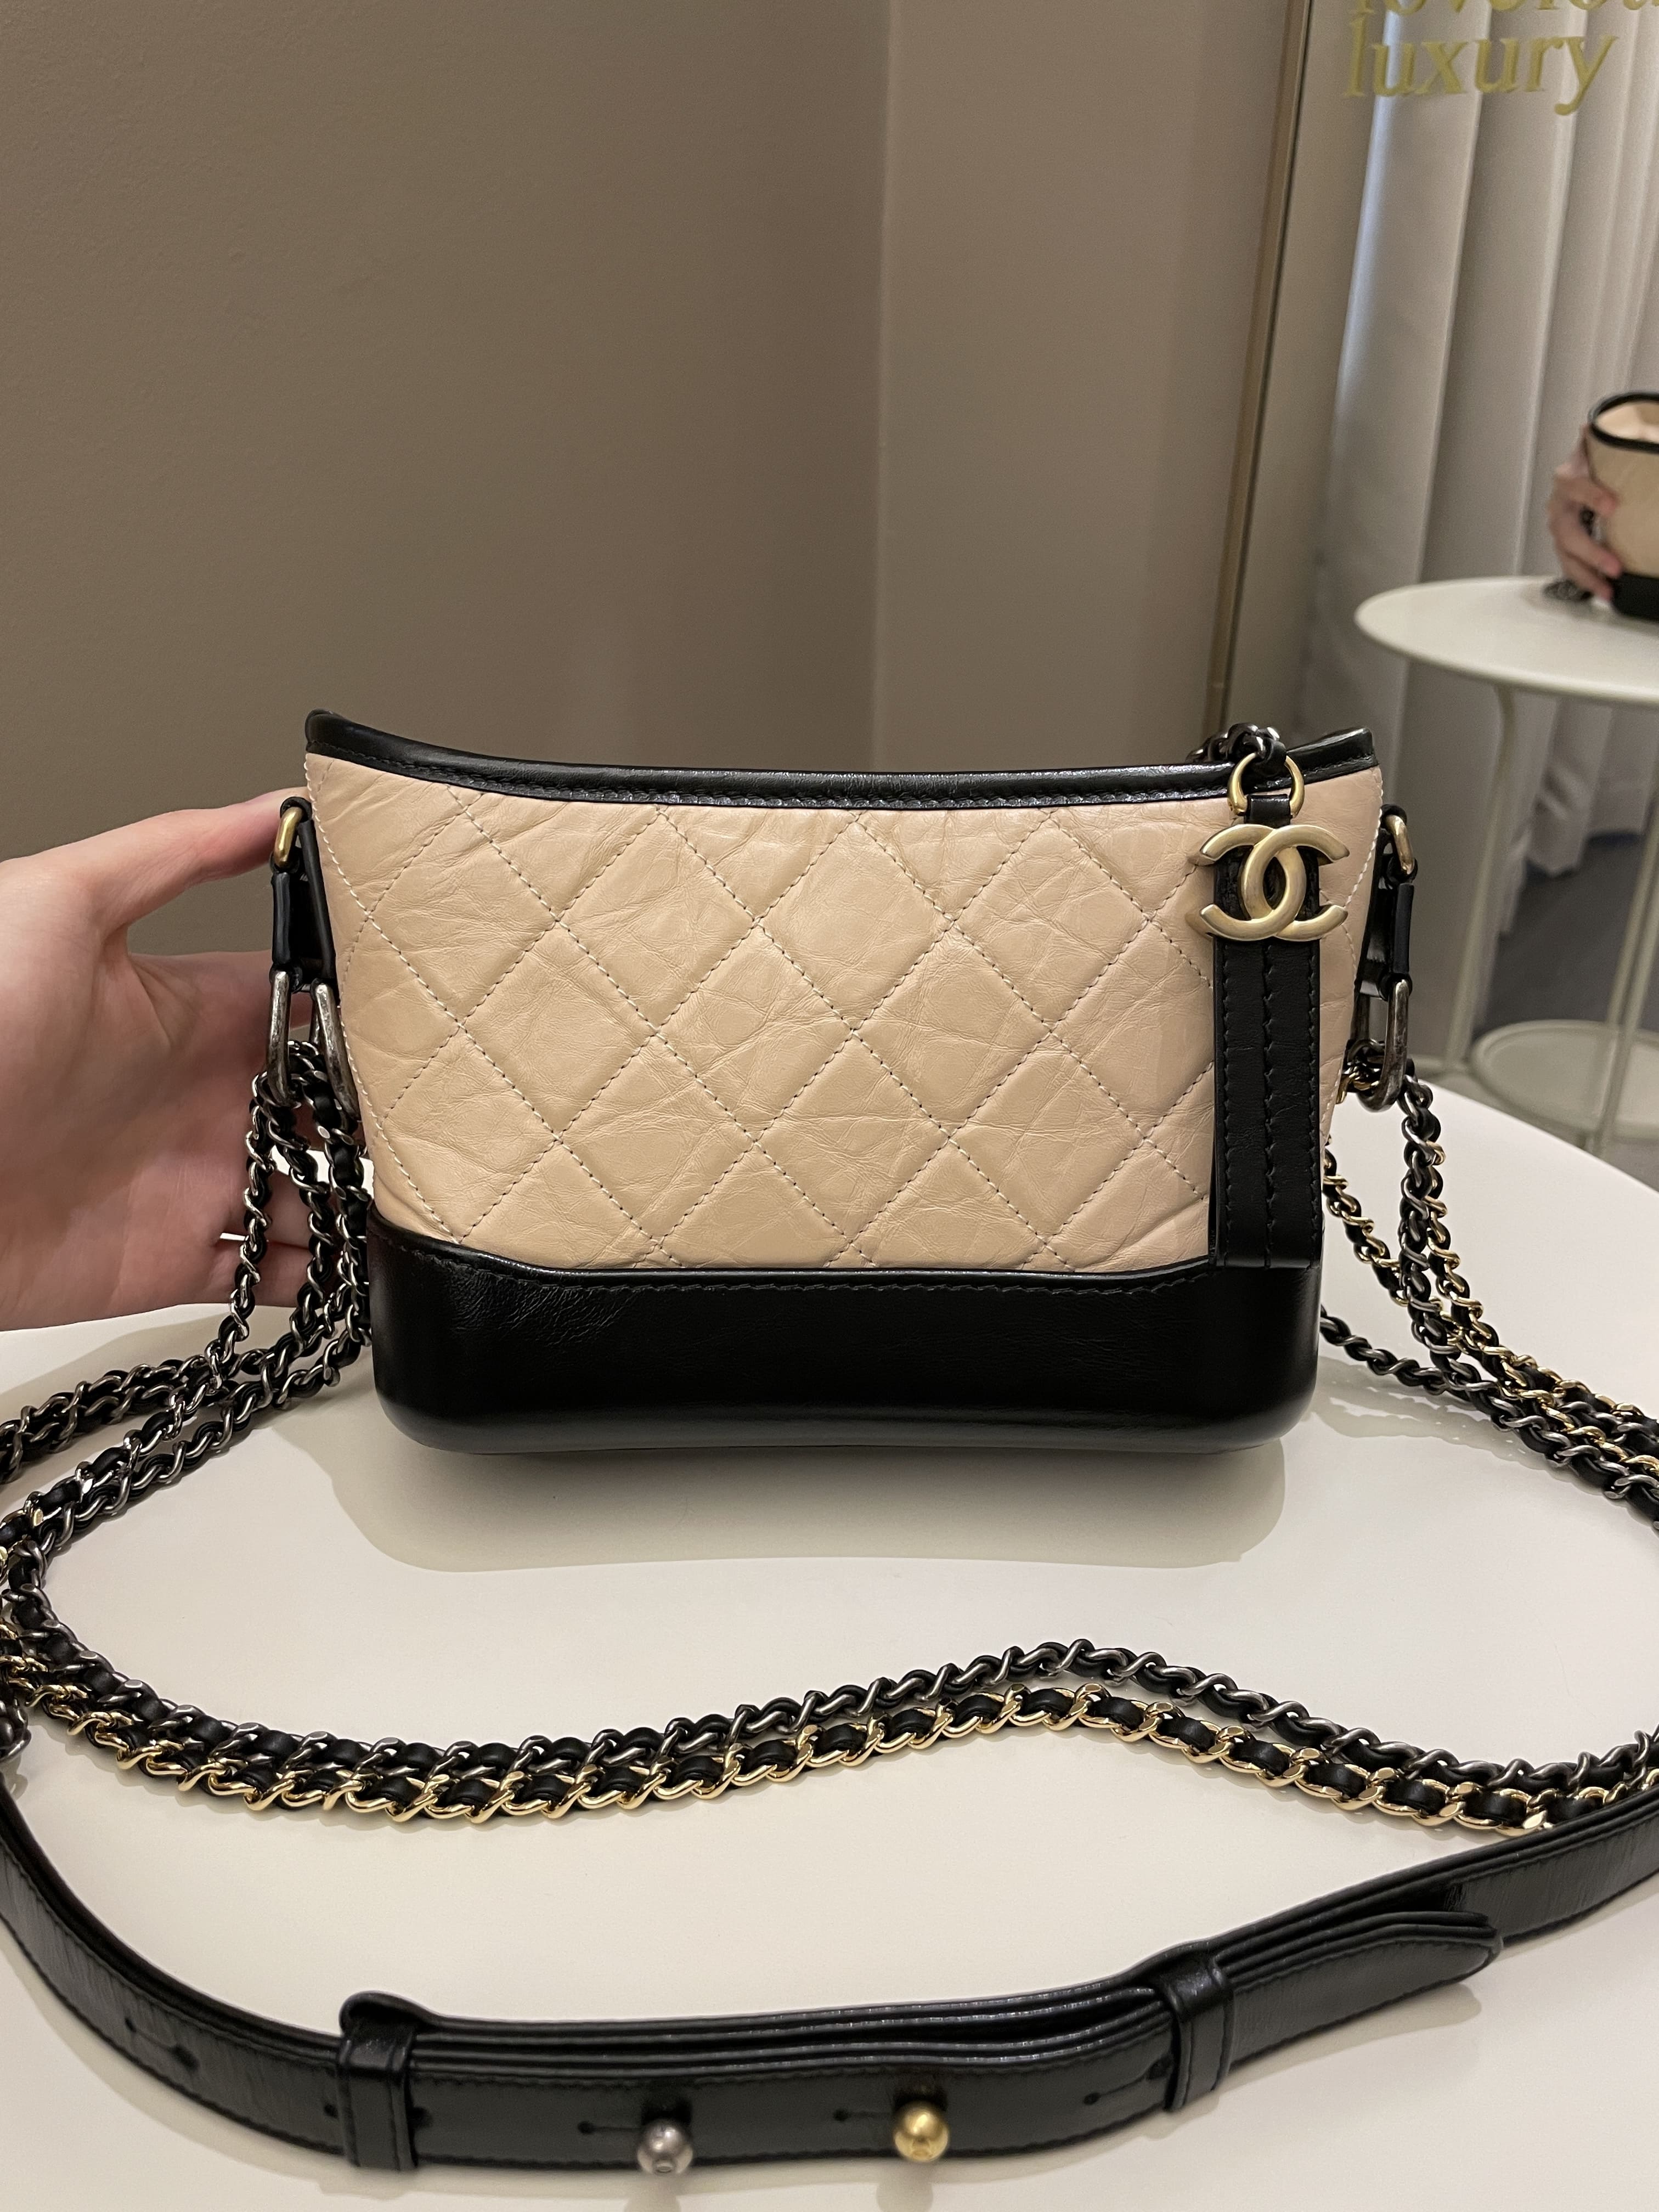 Chanel Beige/Black Quilted Leather Small Gabrielle Hobo Bag